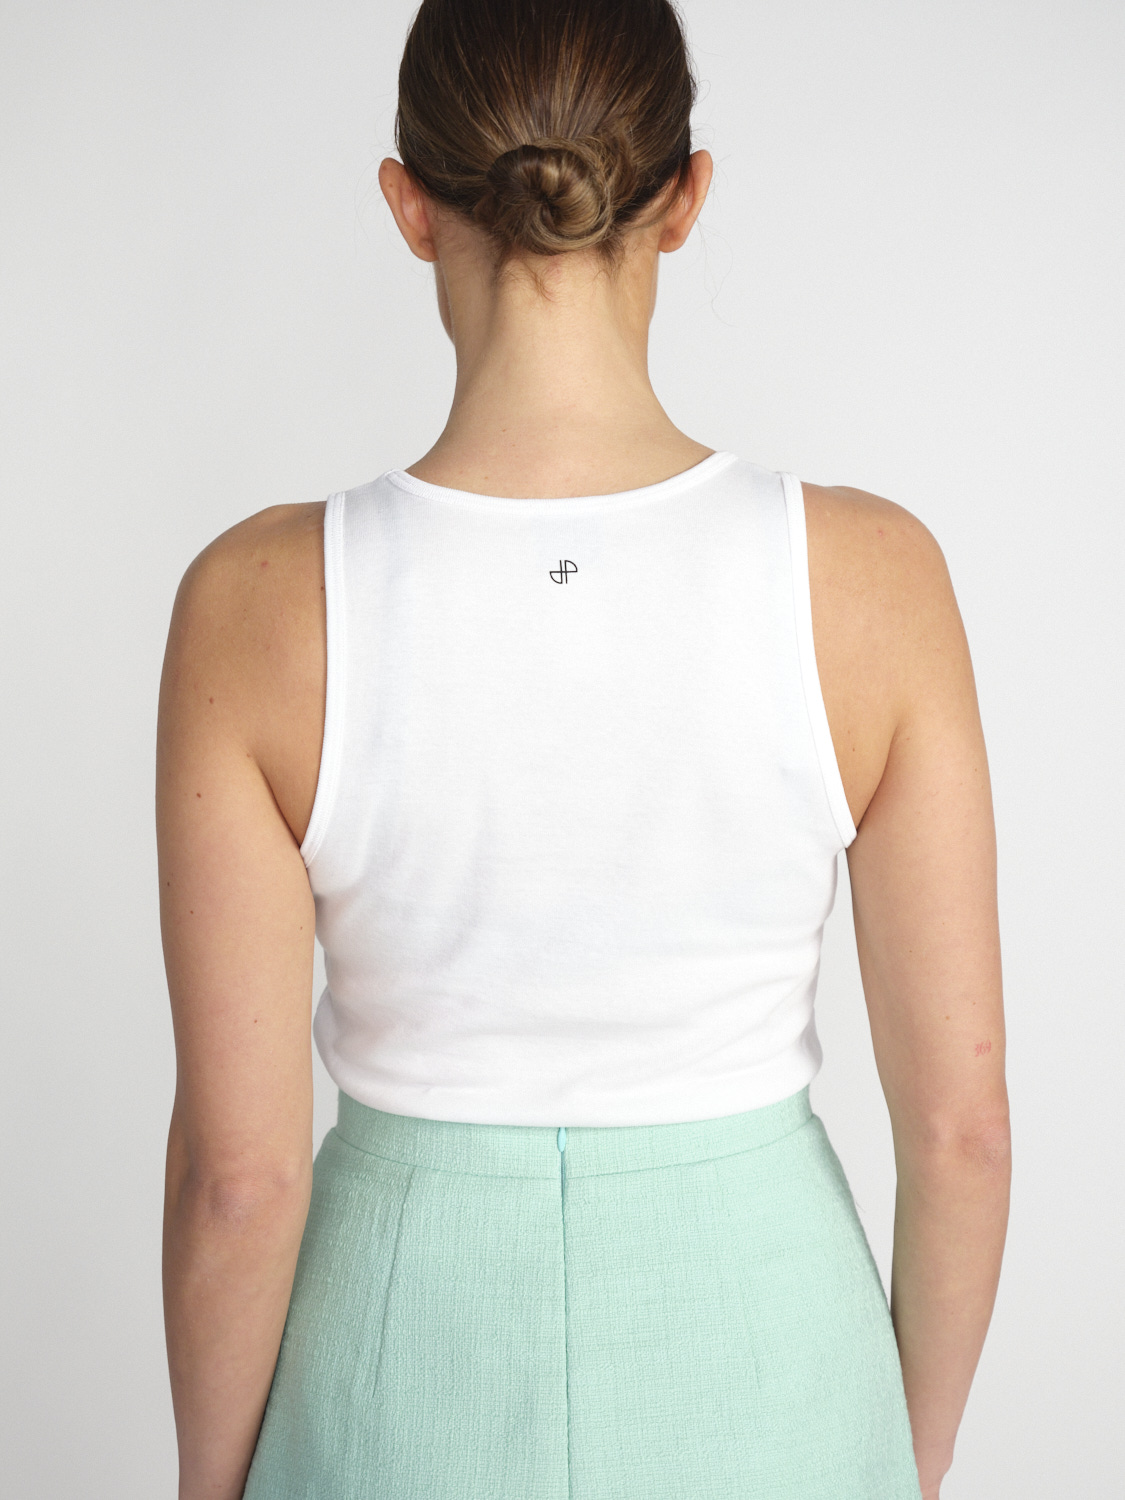 Patou Iconic Tank - Tank top made from organic cotton  mint S